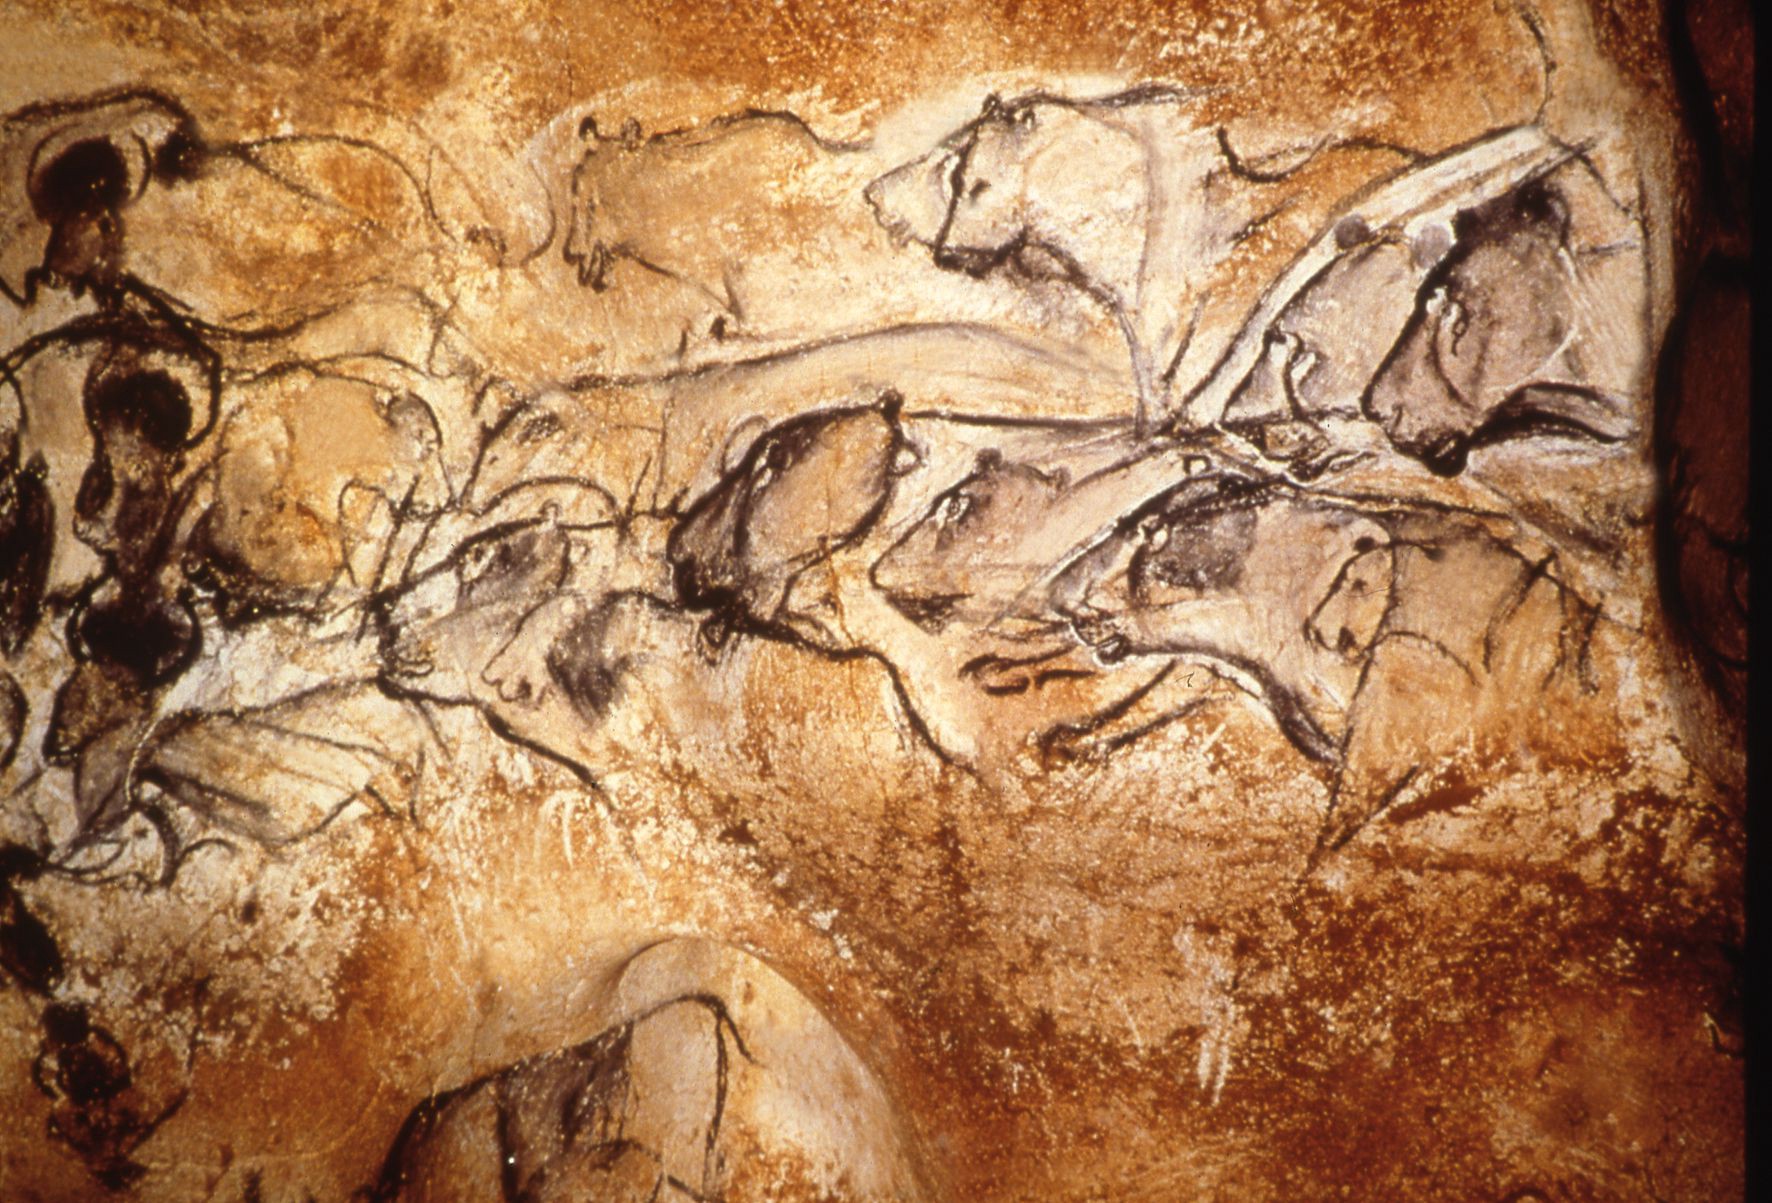 Stone Age Painting At Paintingvalley Com Explore Collection Of